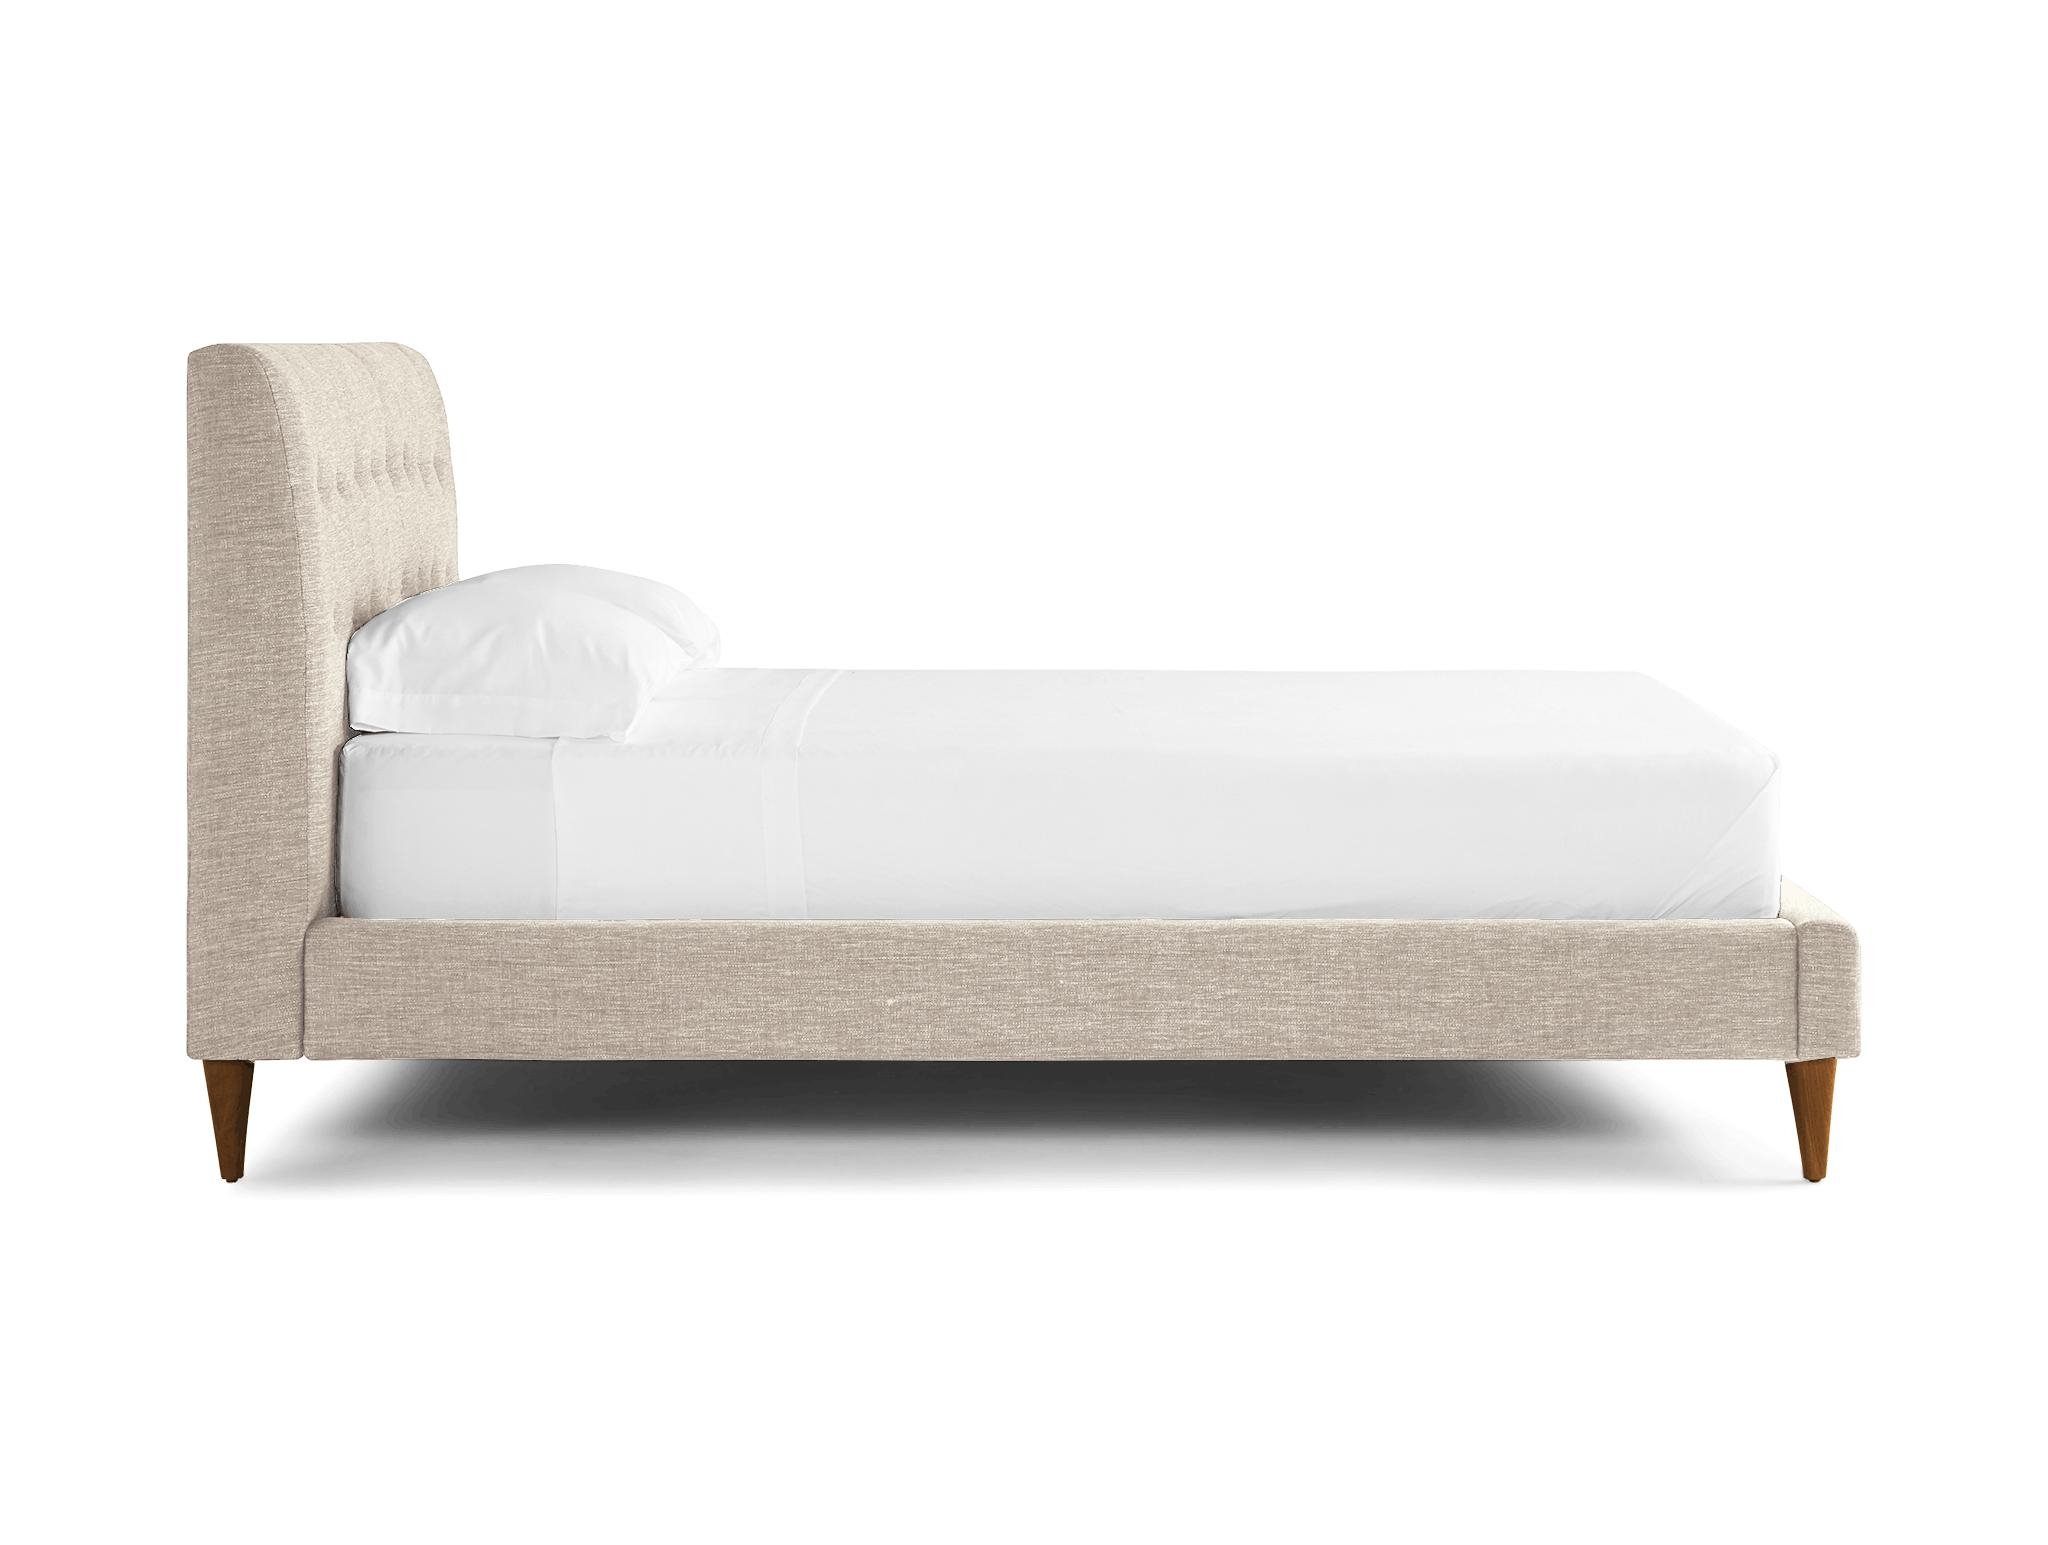 White Eliot Mid Century Modern Bed - Nico Oyster - Mocha - Queen - Image 2